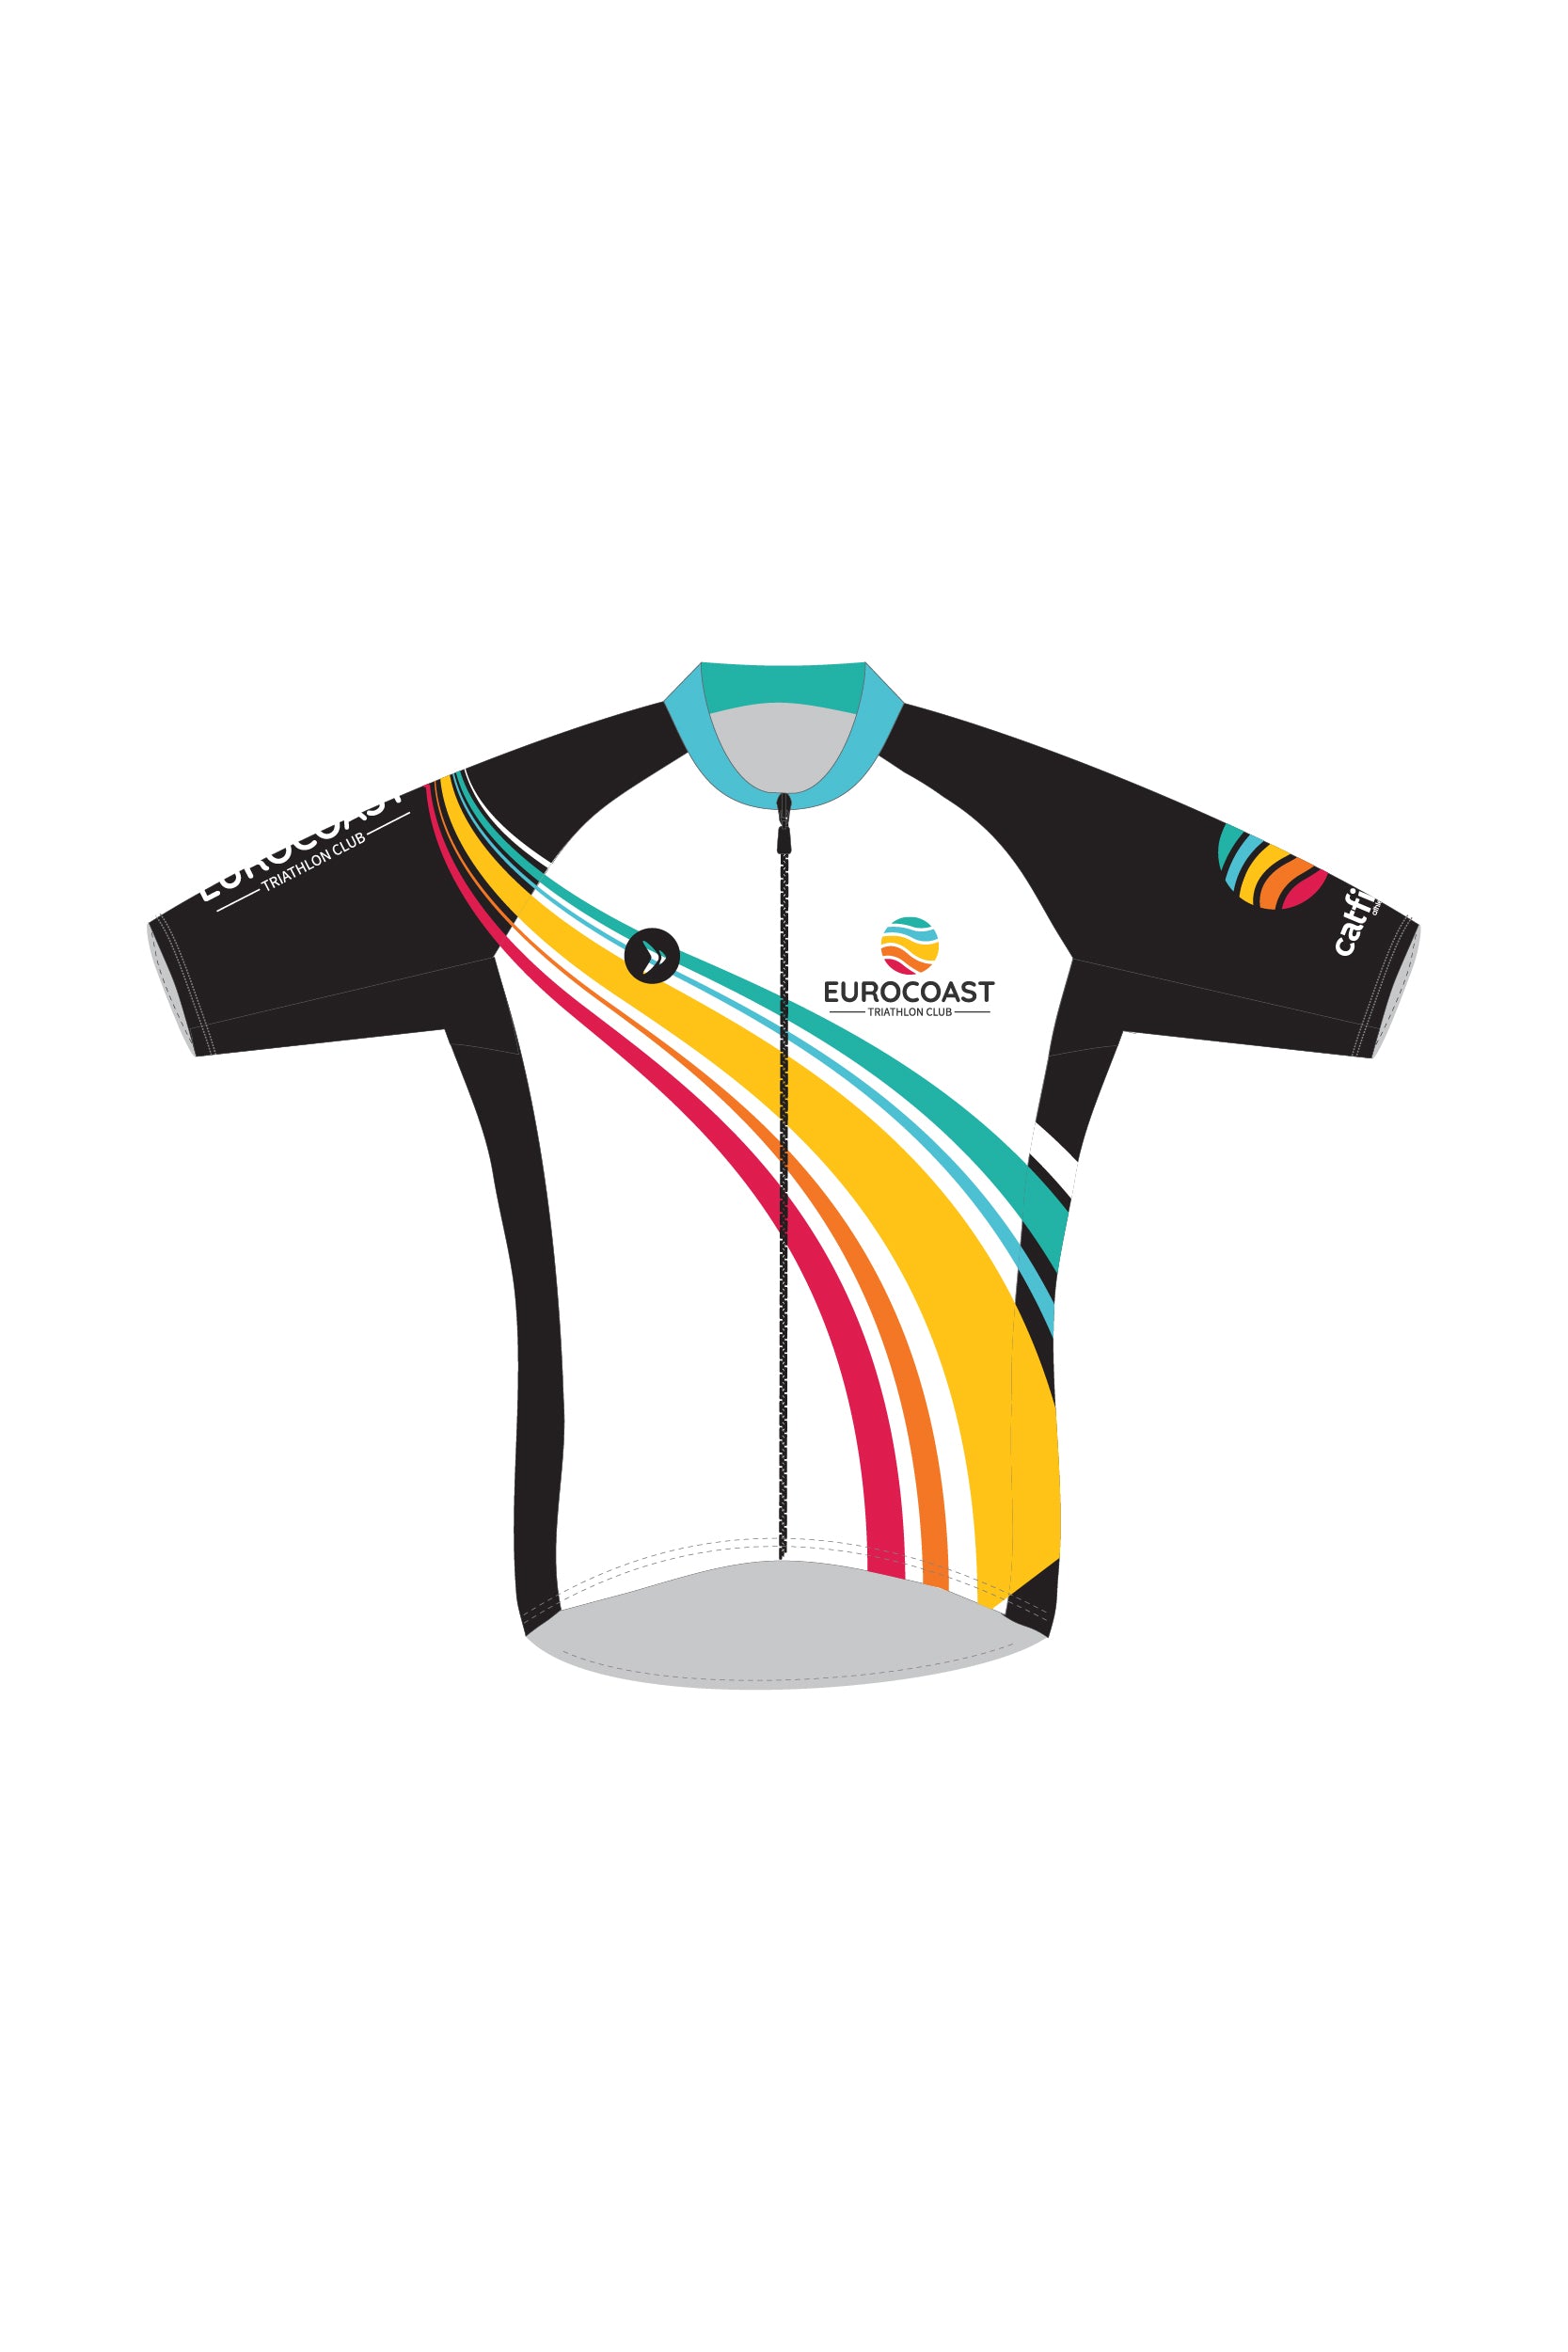 Eurocoast Men's Cycle Jersey